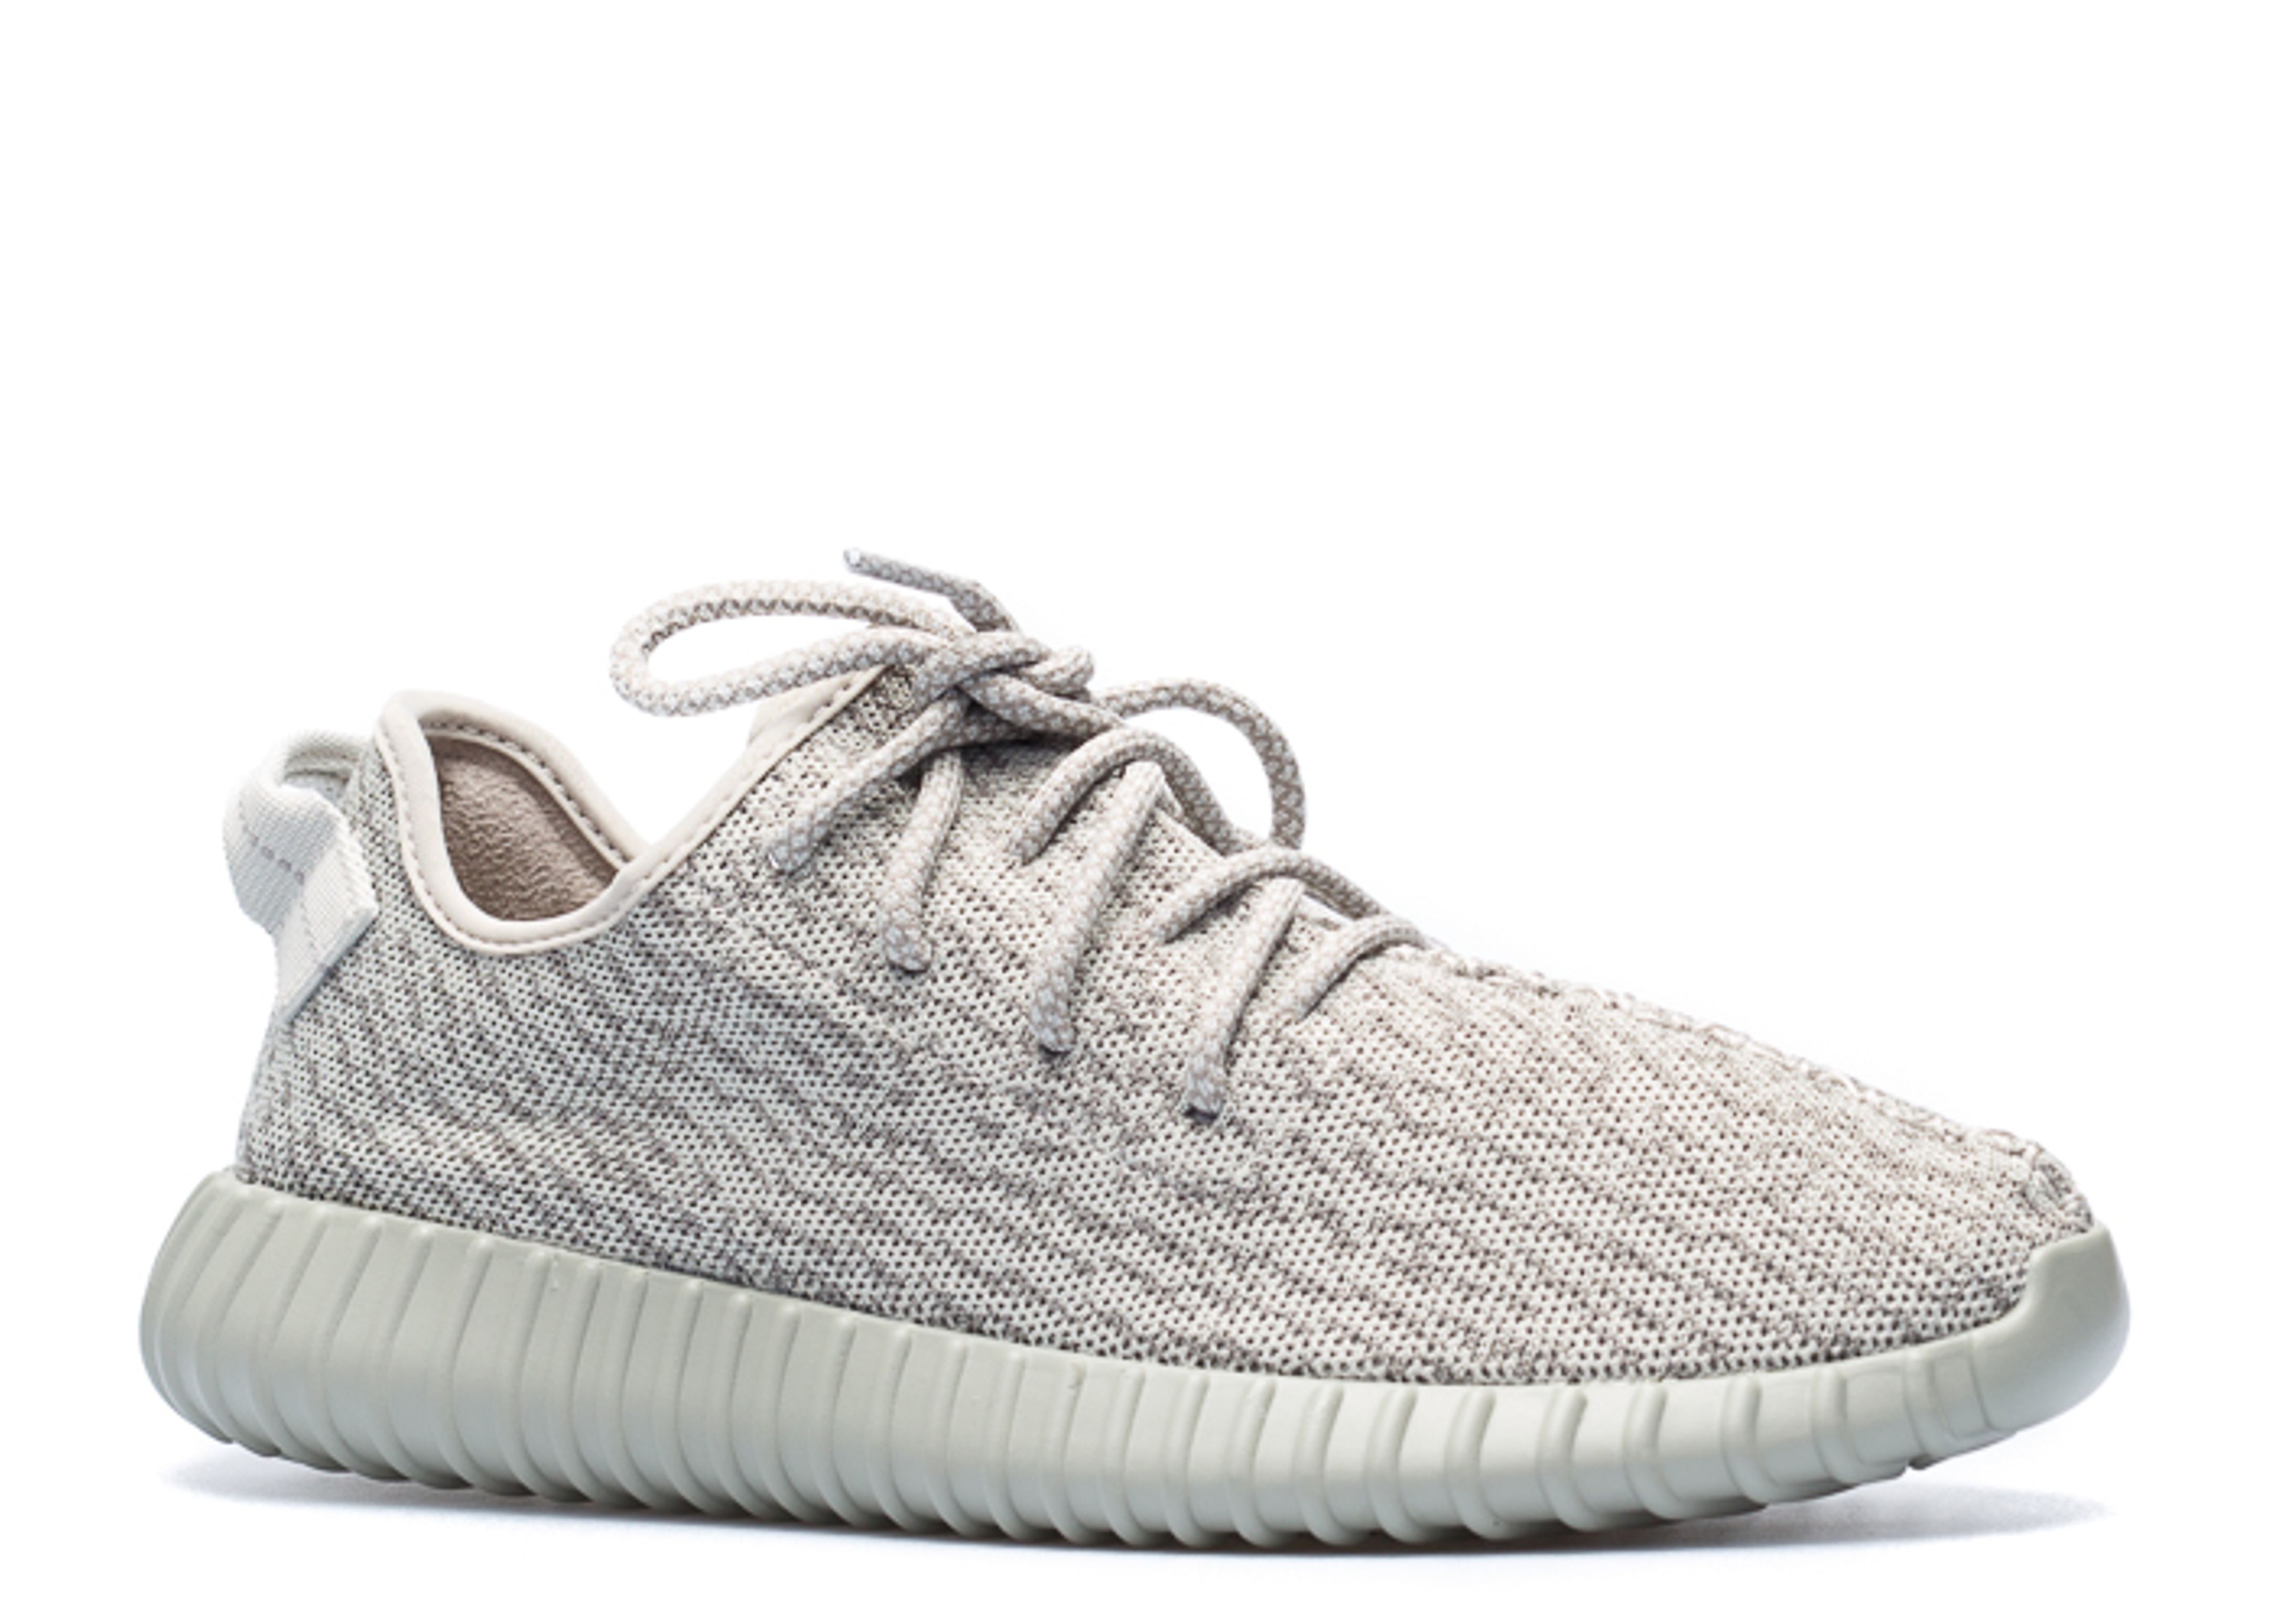 The adidas Yeezy Boost 350 Moonrock Release Created Chaos